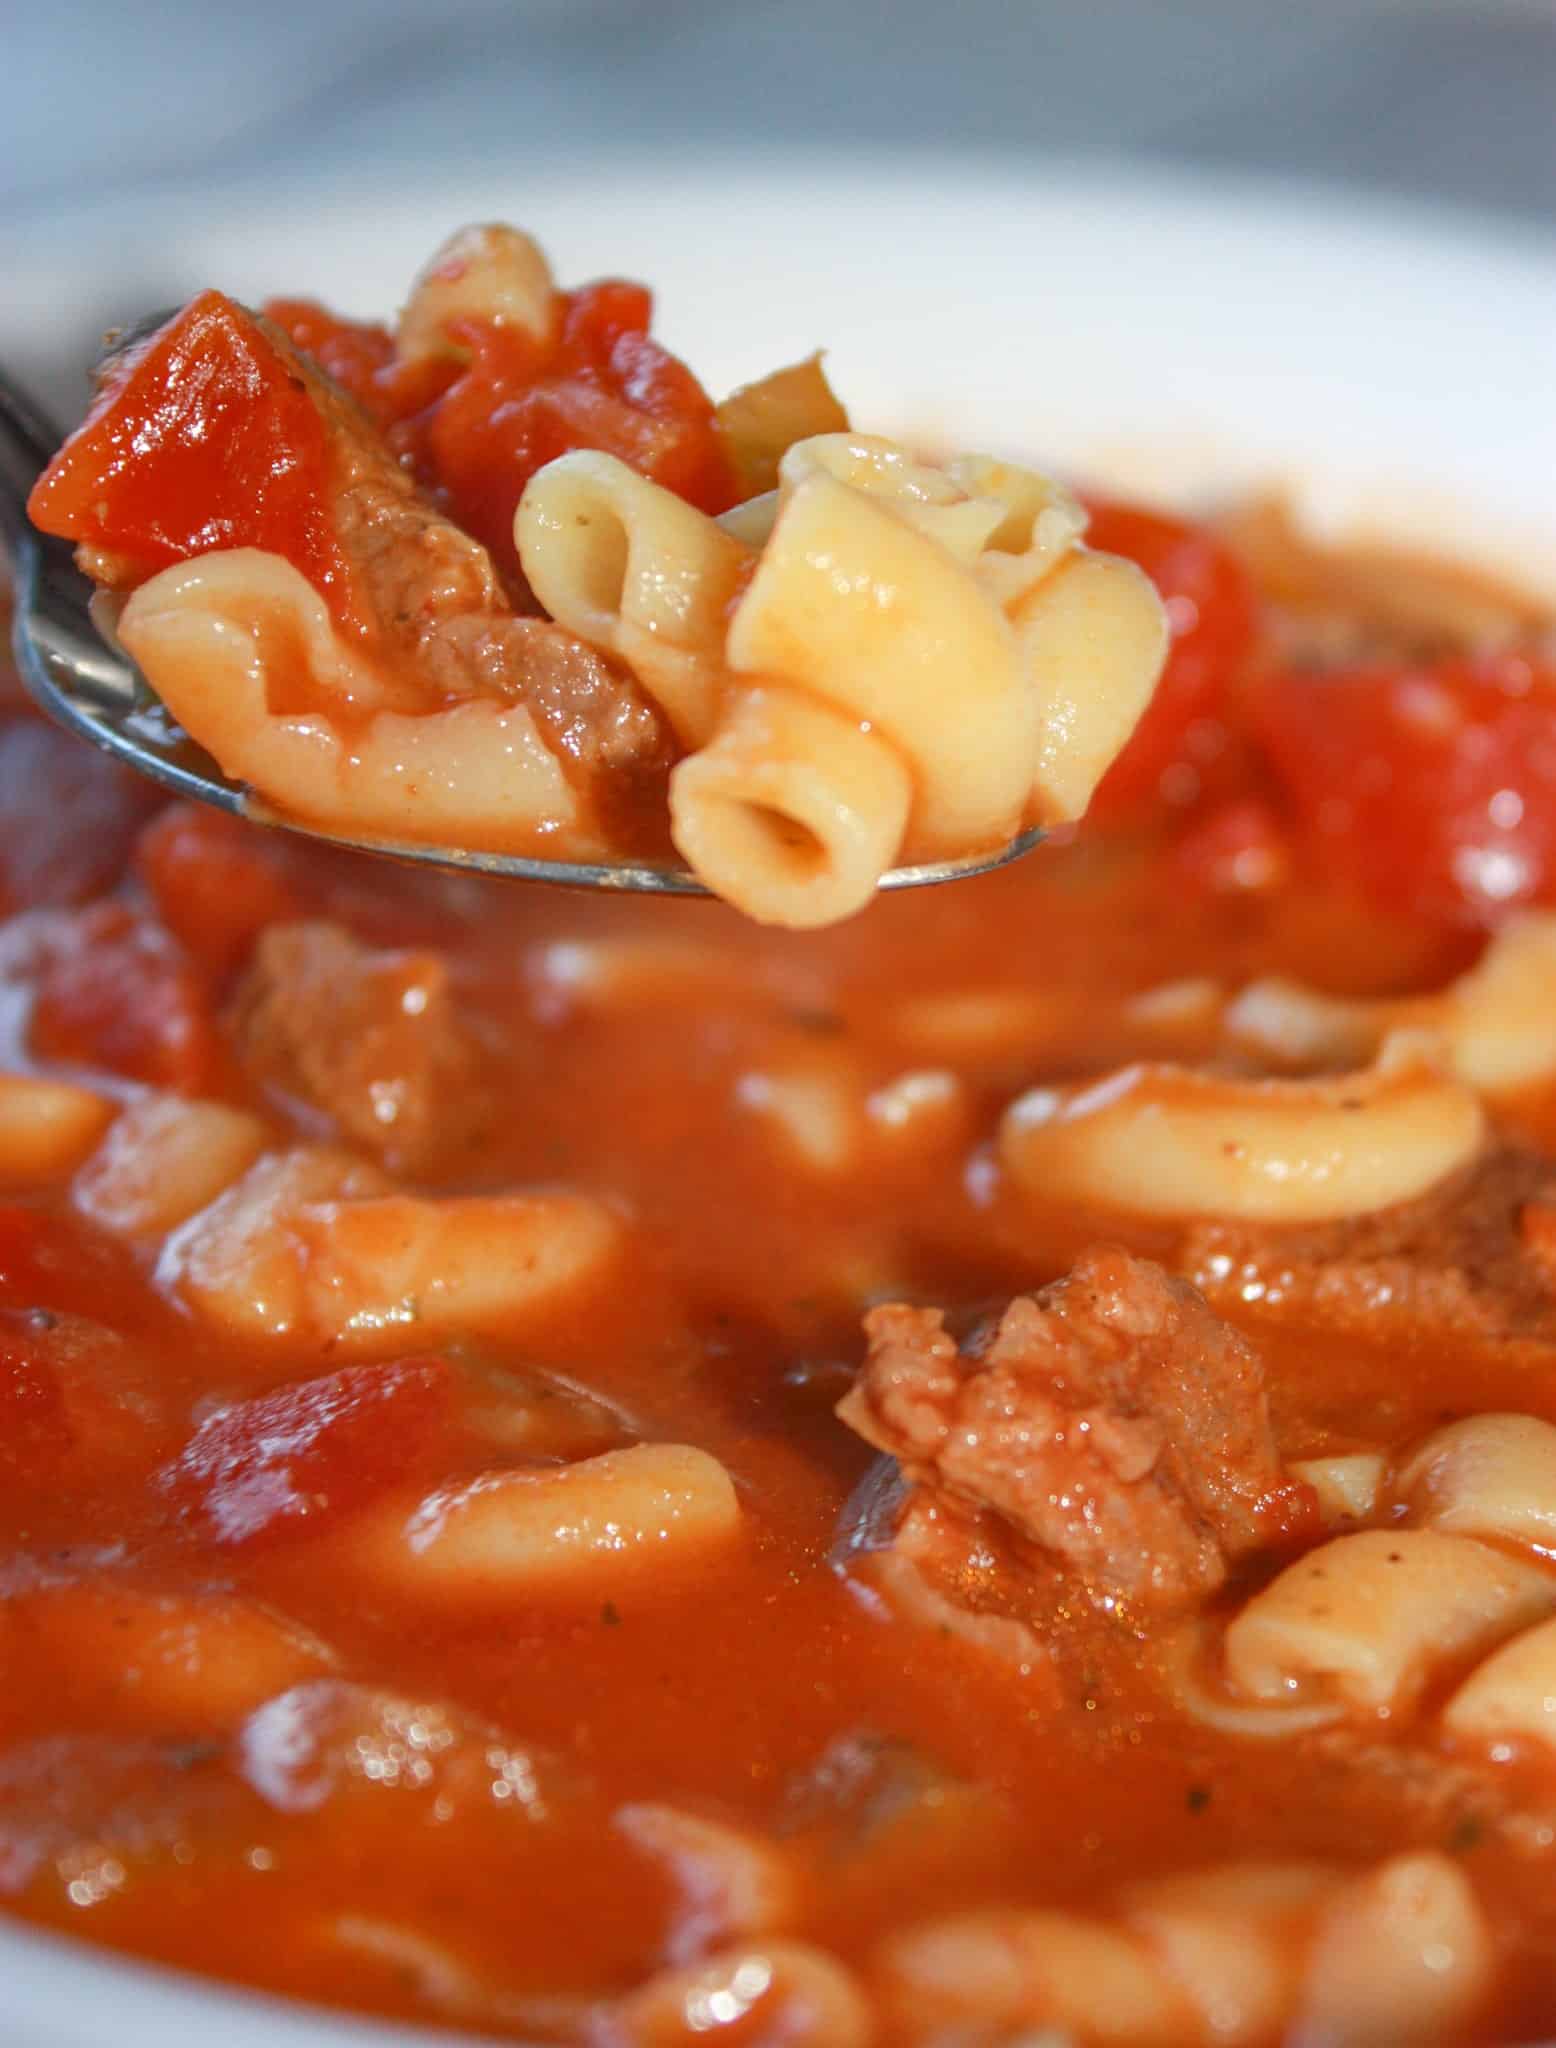 If you are looking for a hearty comfort food recipe then you will enjoy Instant Pot Tomato Beef Soup with Pasta.  This gluten free soup will warm your belly and satisfy your appetite!